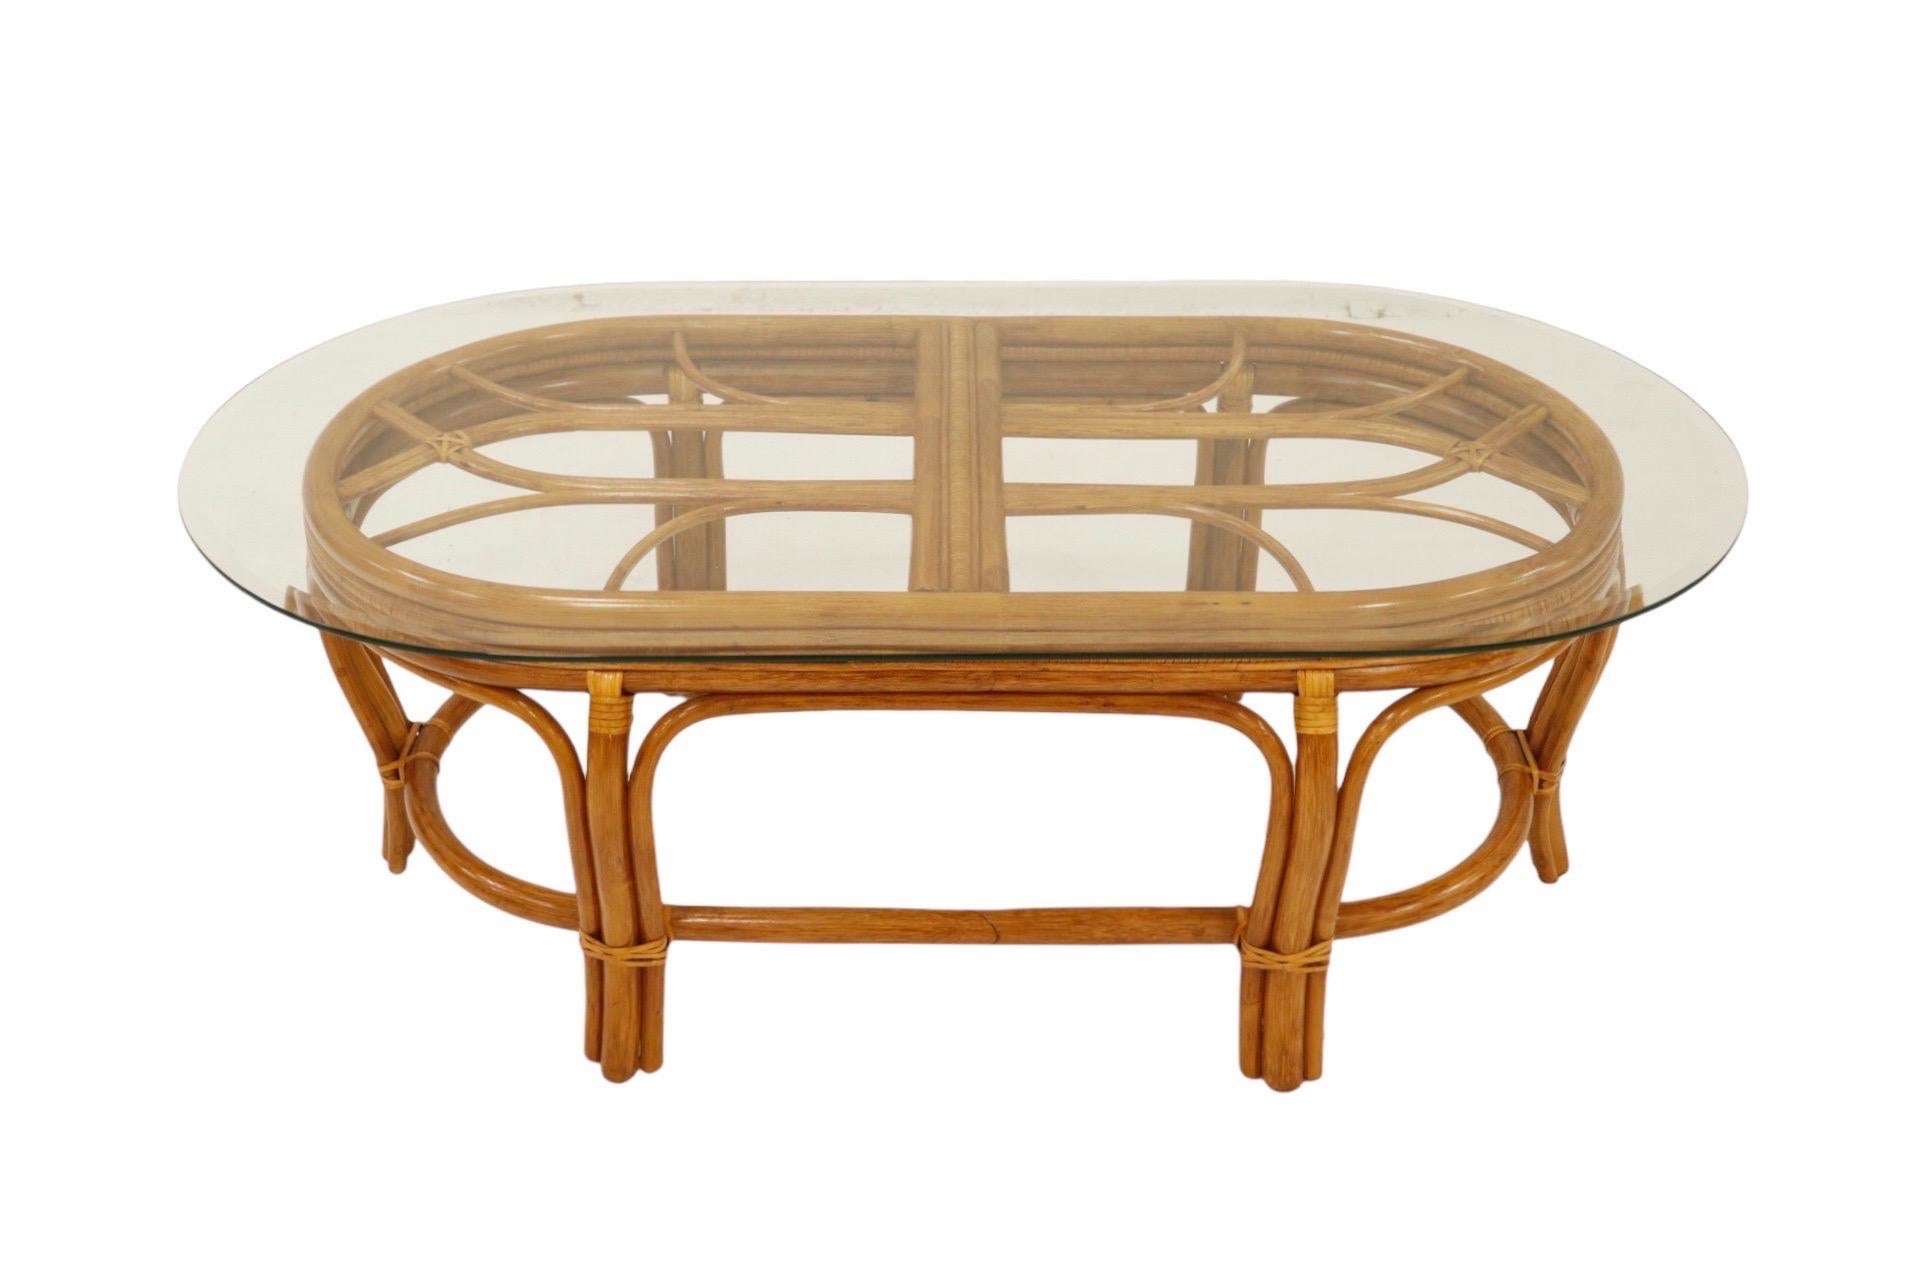 Bamboo, Rattan and Glass Patio Set, 5pcs For Sale 2